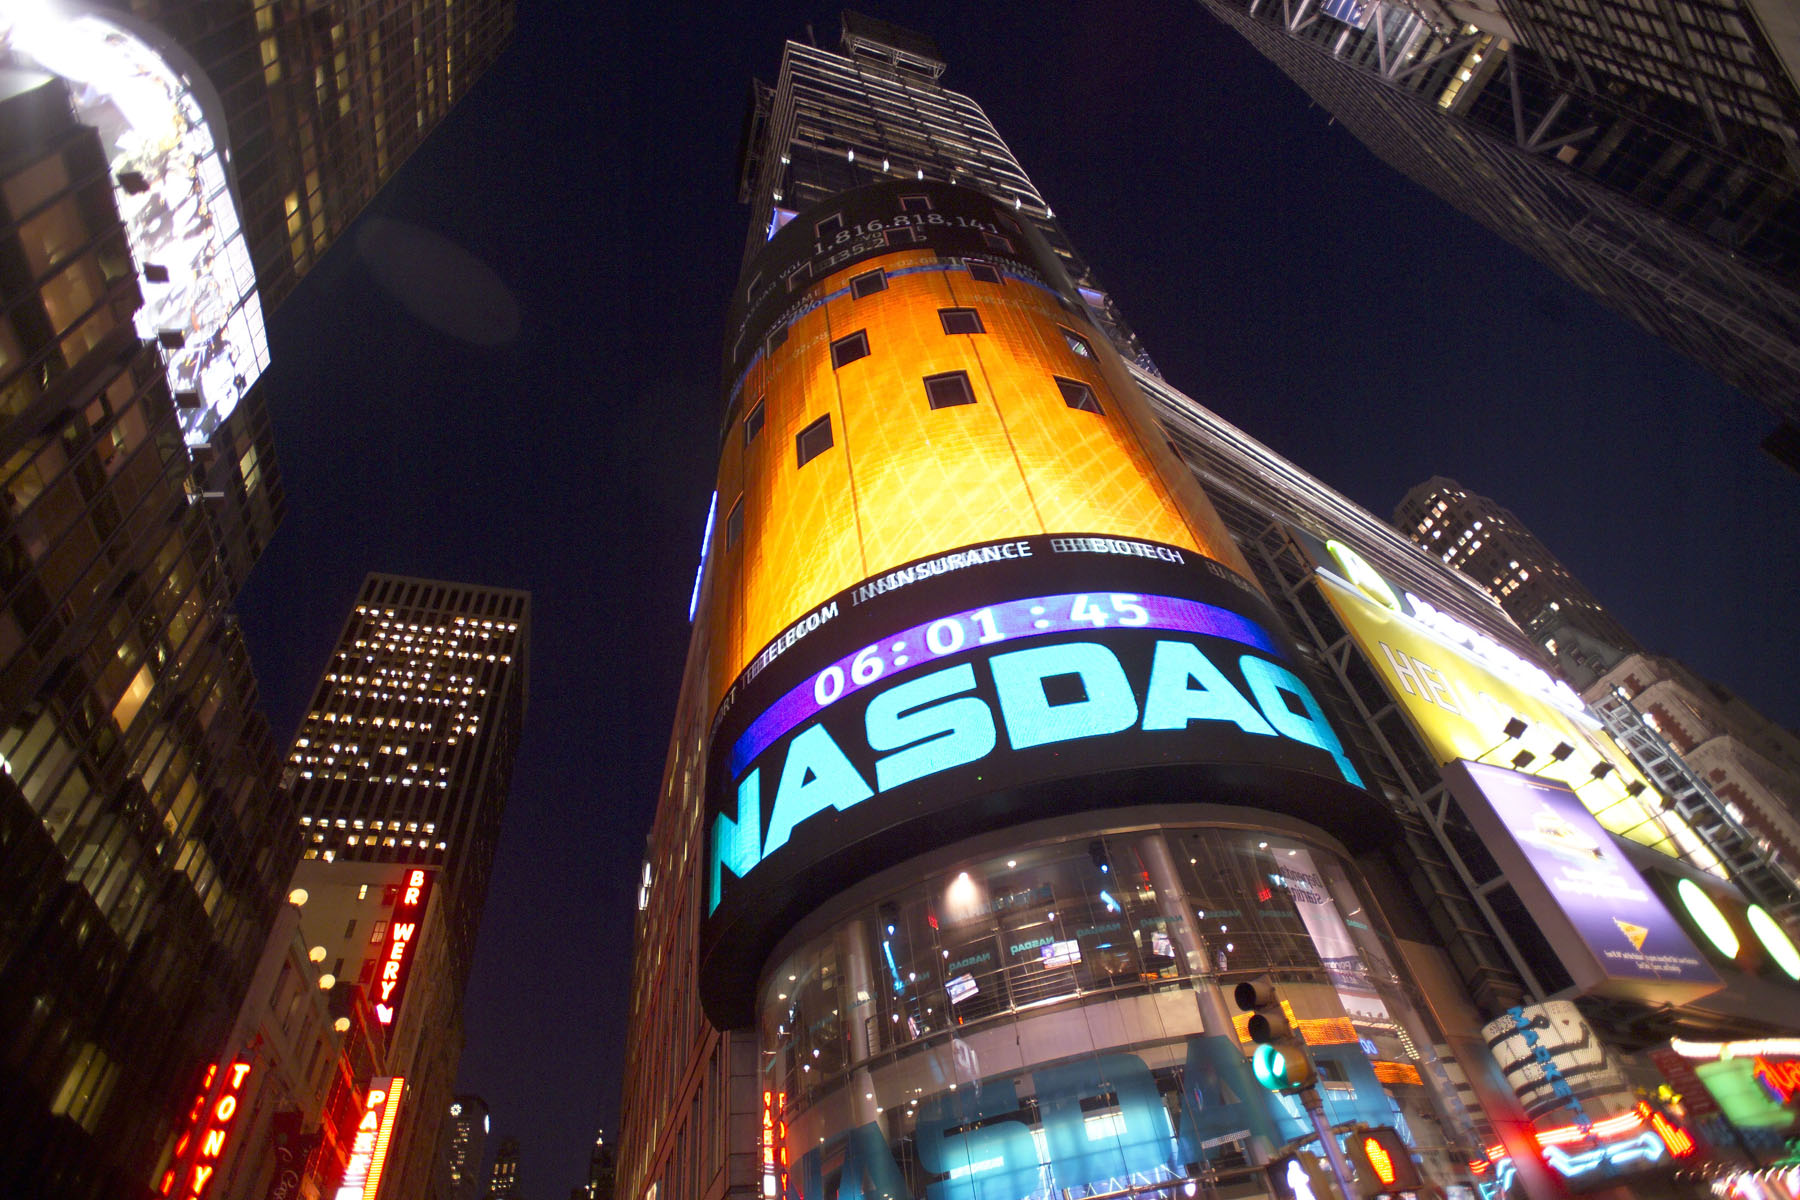 Nasdaq announced the appointment of Salil Donde as Executive Vice President and Head of Global Information Services. (image: Nasdaq)